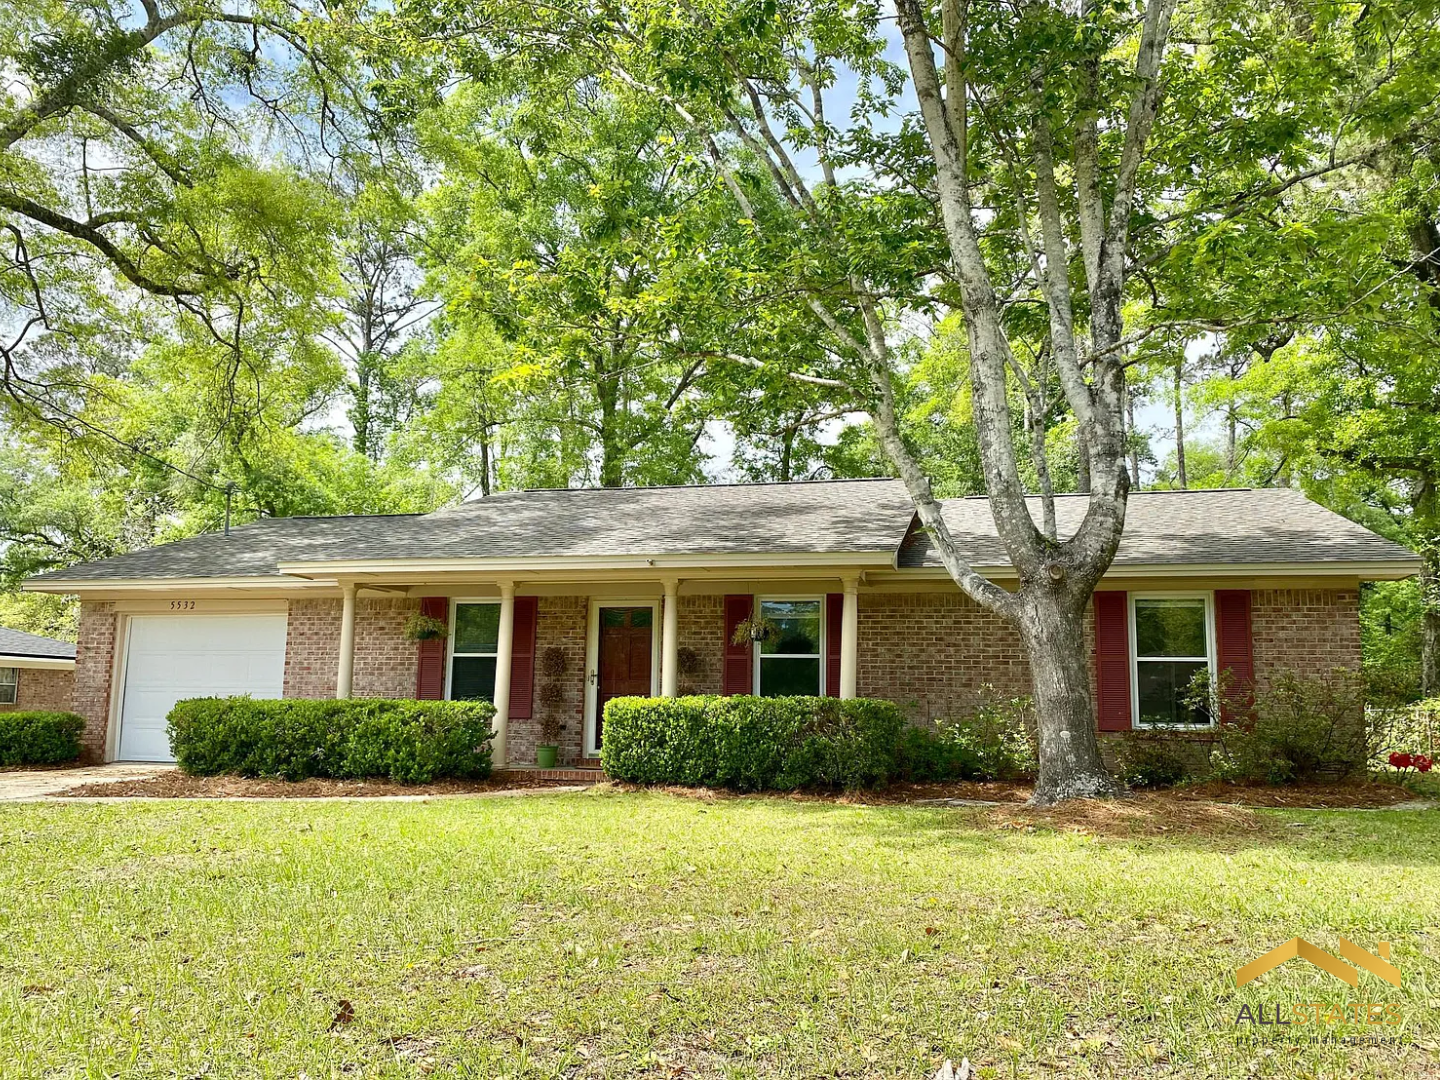 Photo of property: 5532 Mossy Top Way, Tallahassee, FL 32303